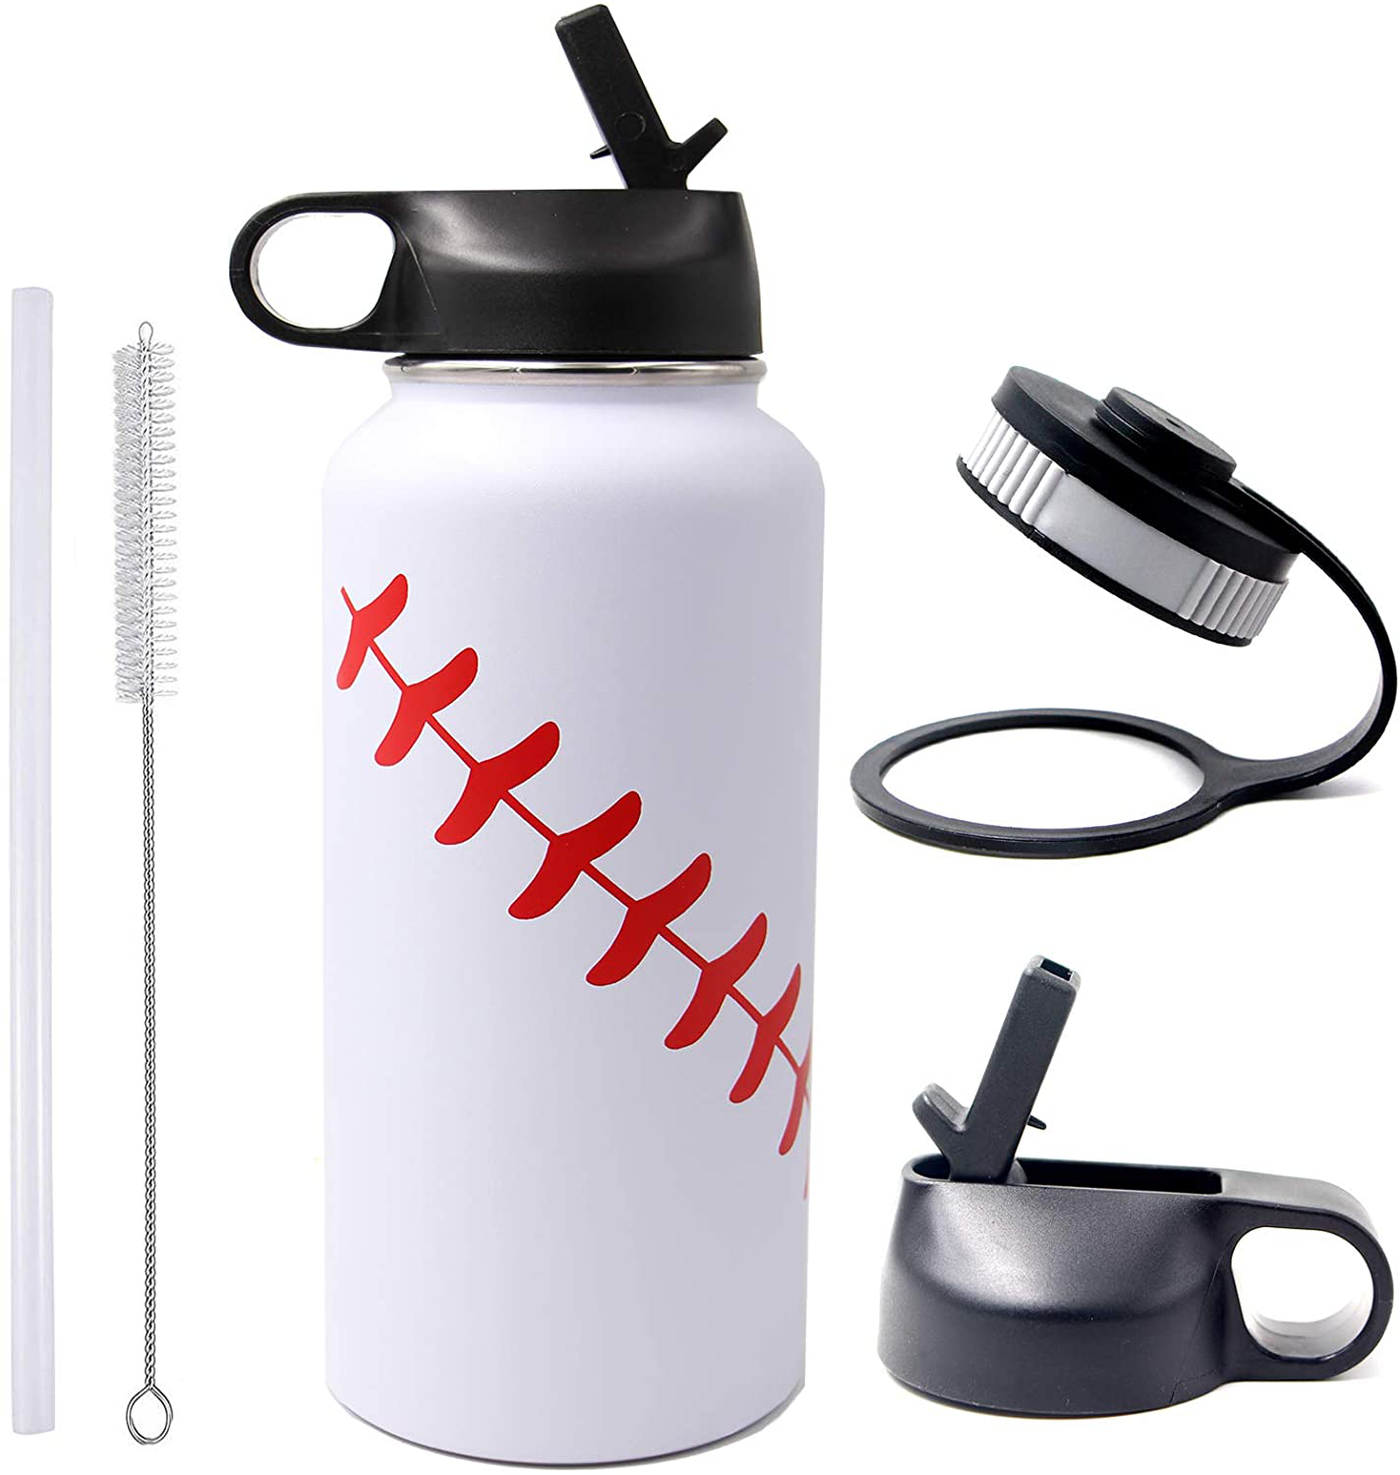 40 oz Softball Baseball Water Bottle, Flask Sports with 2 Lids 18/8 Stainless Steel Tumbler Double Wall Vacuum Insulated Hot/Cold (40oz, Yellow Softball)